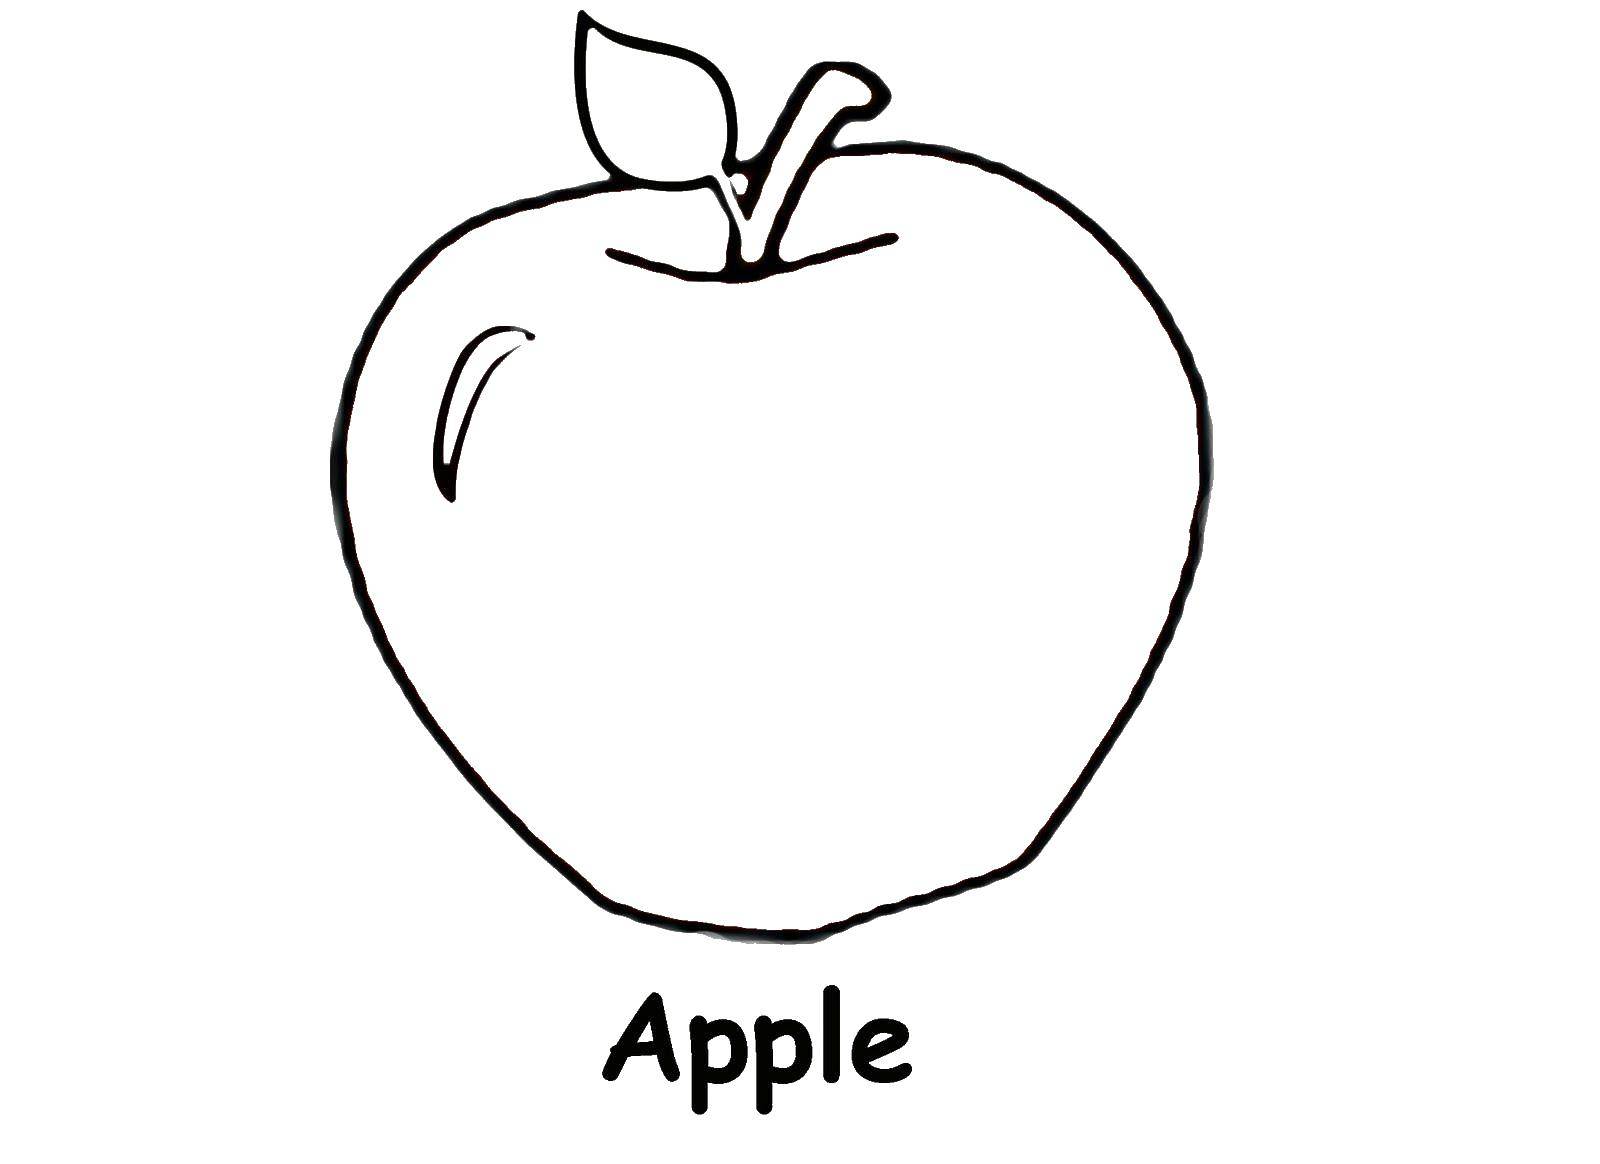 Coloring Apple letter I. Category English alphabet. Tags:  The alphabet, letters, words.